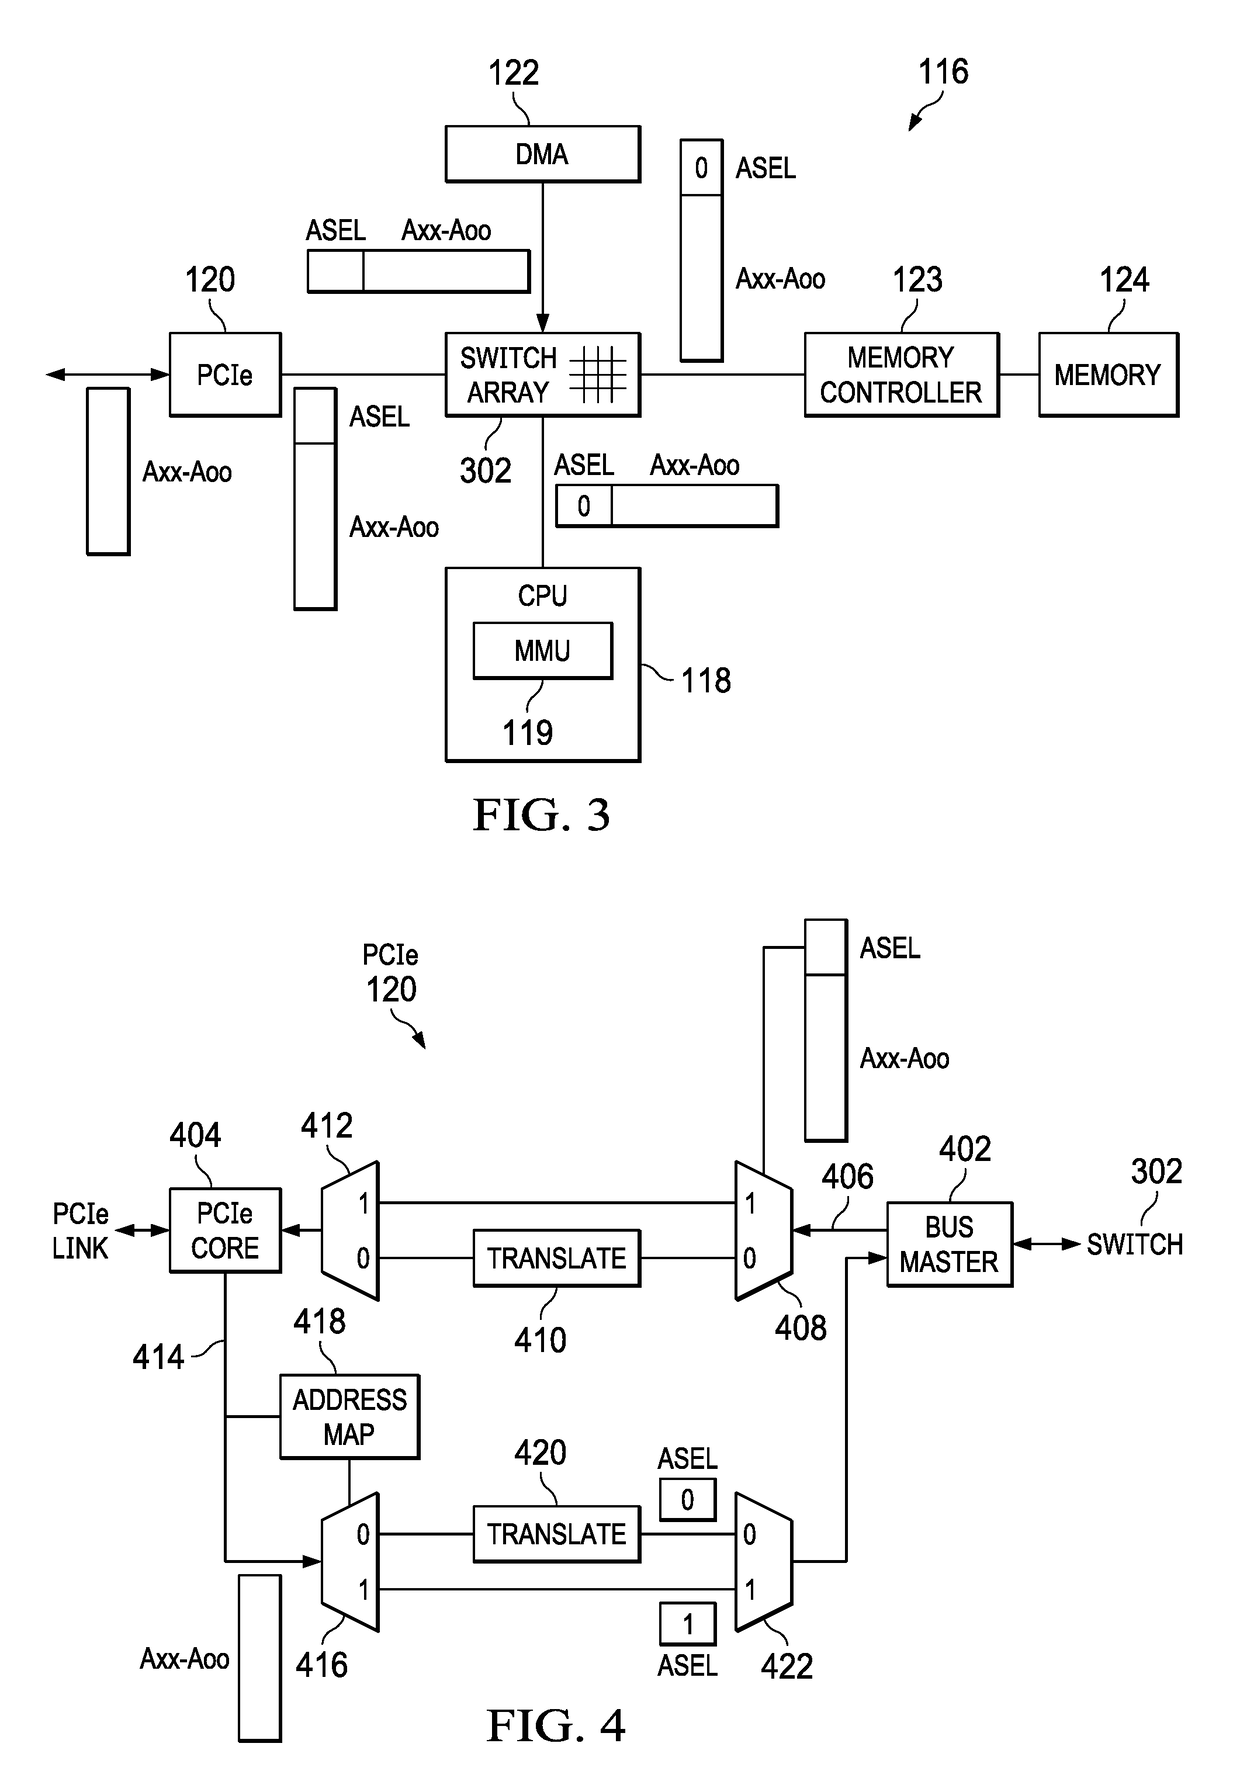 Apparatus and Mechanism to Bypass PCIe Address Translation By Using Alternative Routing